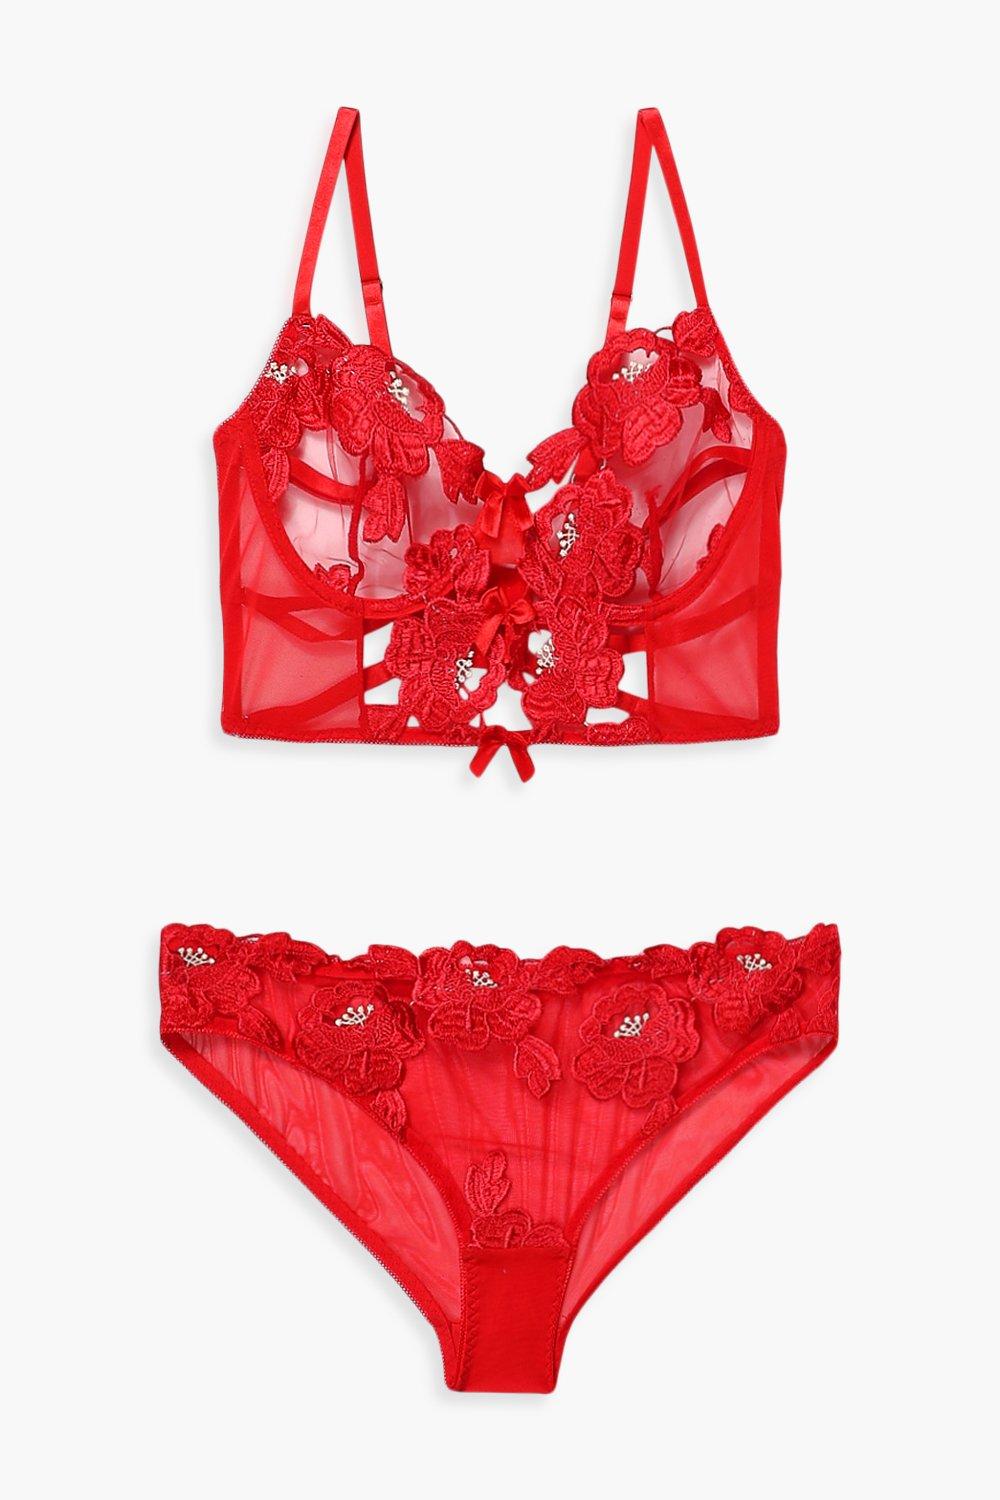 Red Rose Lingerie Set - Buy Red Rose Lingerie Set Online at Best Prices in  India